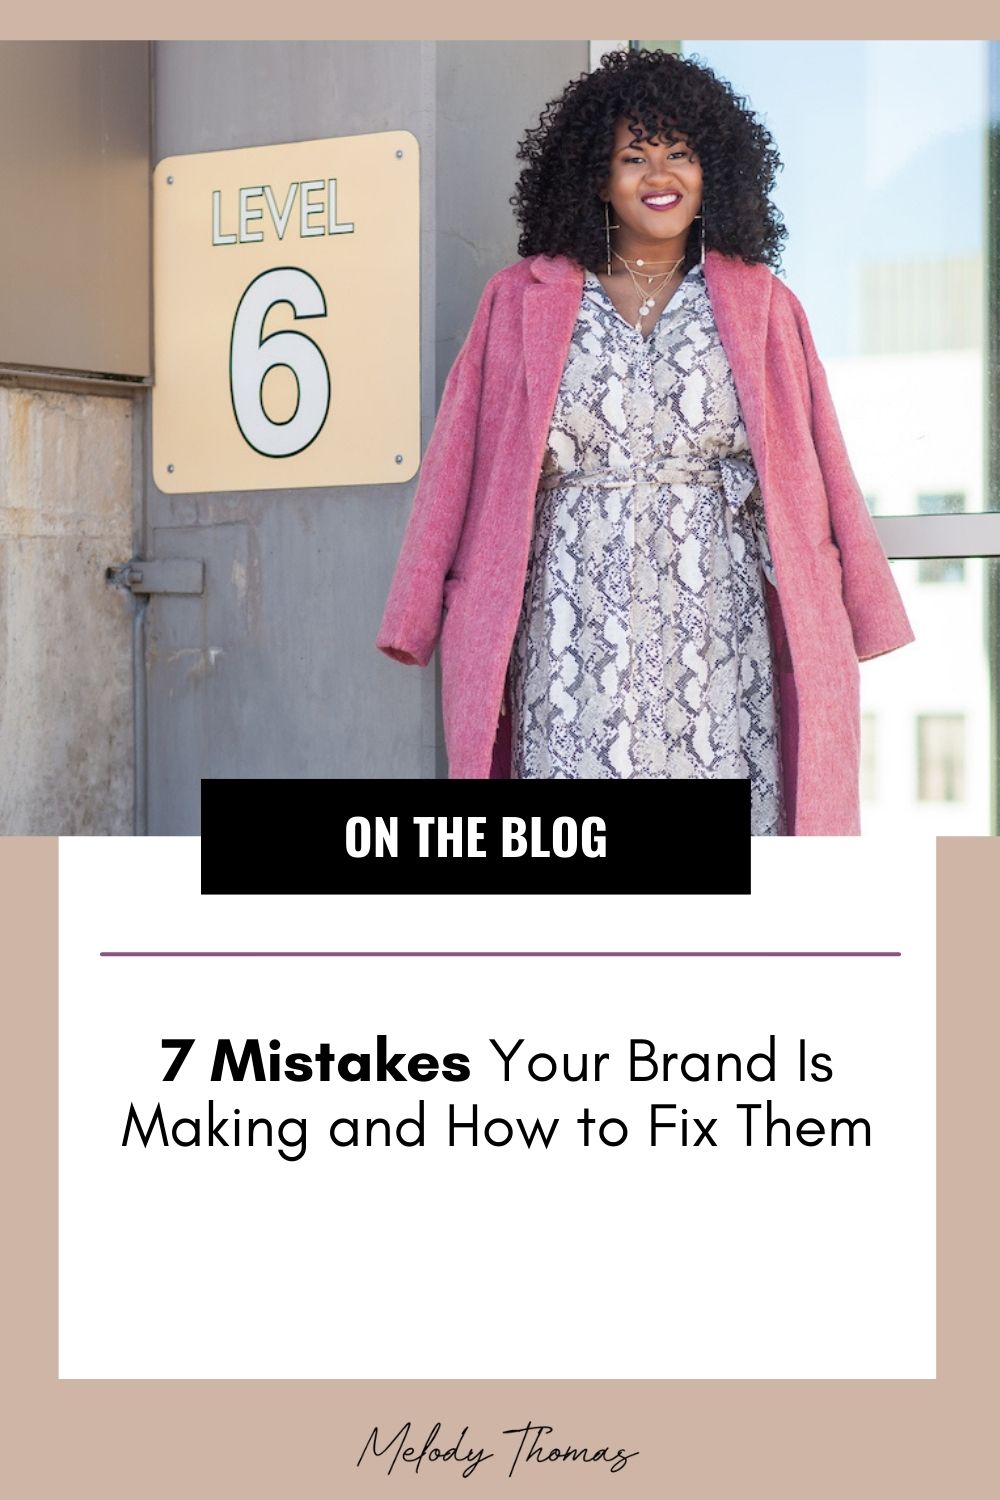 7 Mistakes Your Brand Is Making and How to Fix Them